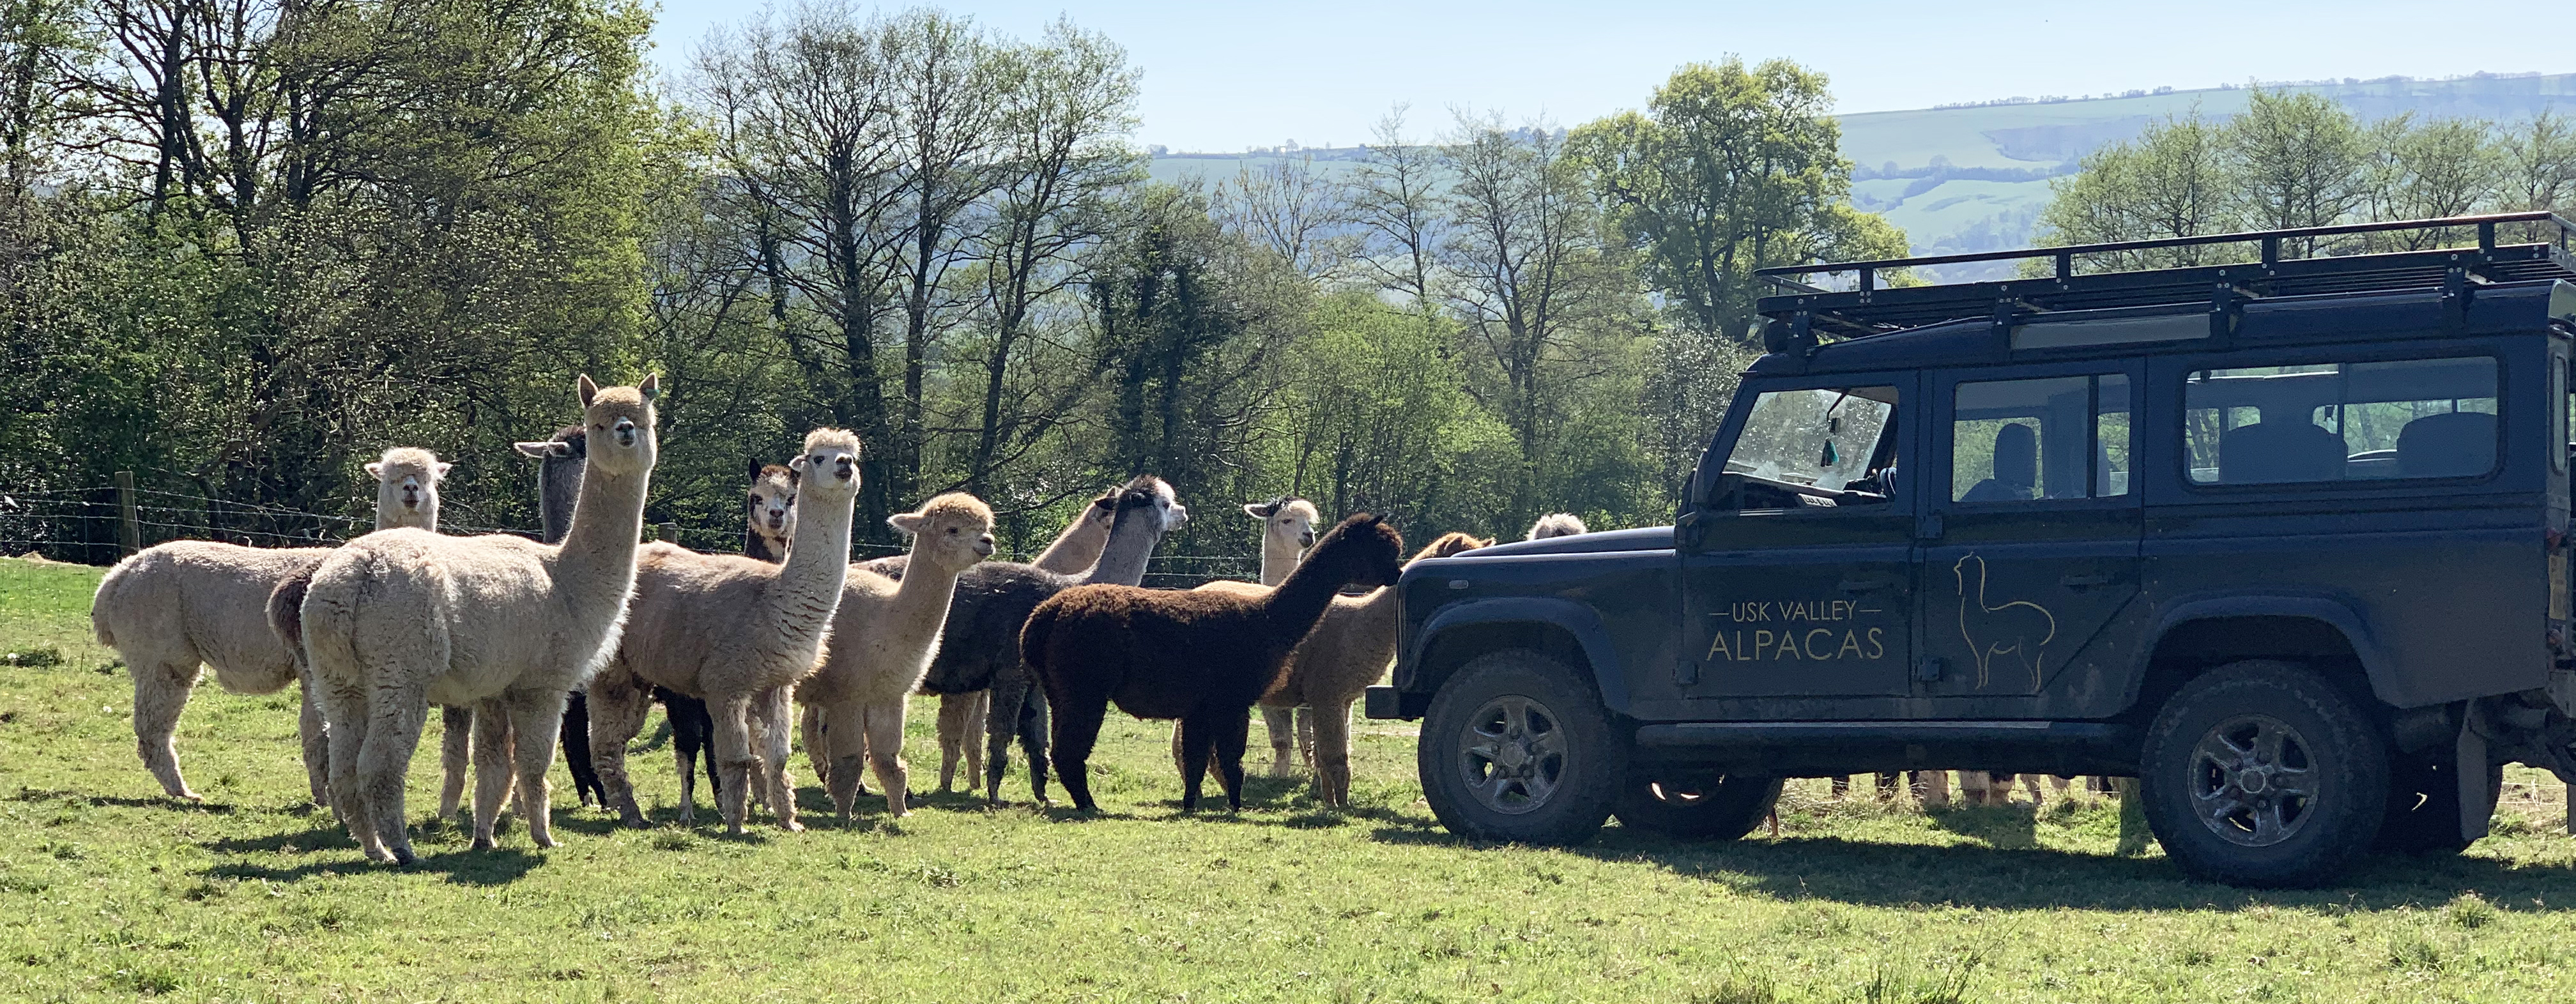 Our alpaca herd on our farm in South Wales, stood beside an Usk Valley Alpacas branded vehicle